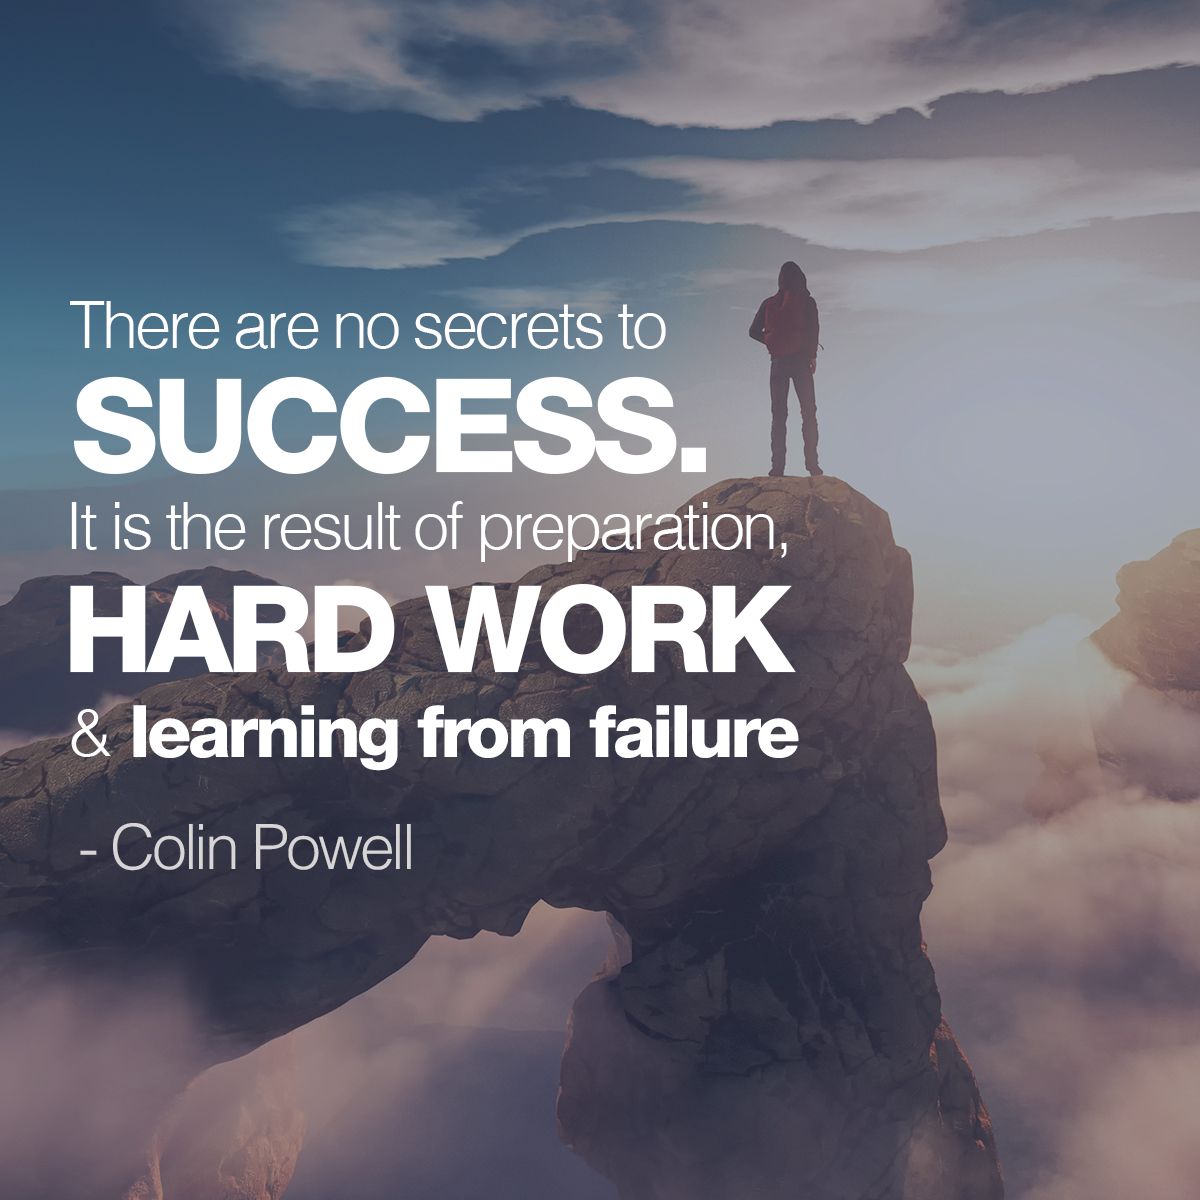 There are no secrets to success. It is the result of preparation, hard work & learning from failure - Colin Powell